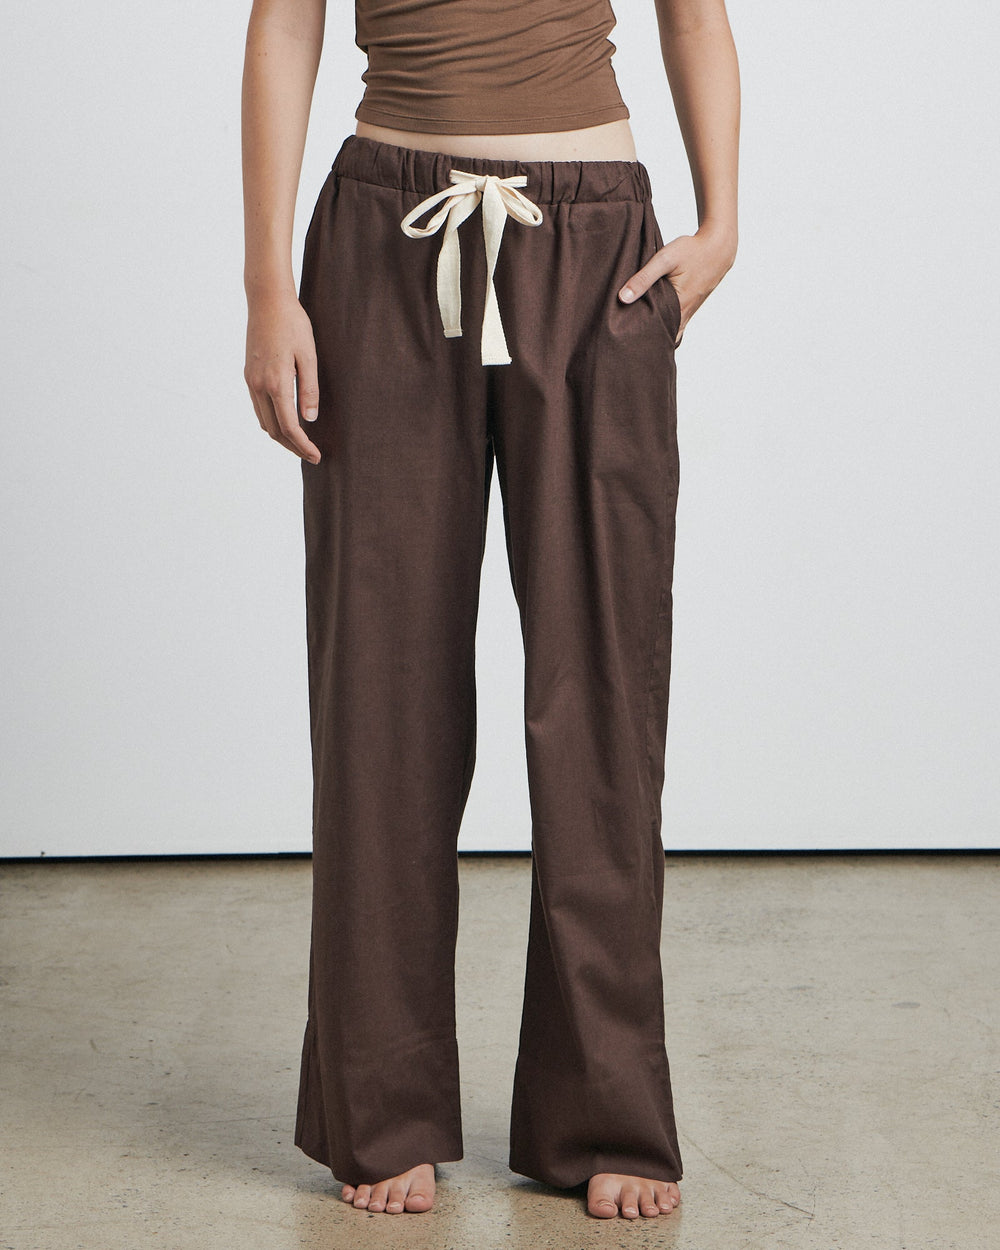 The Mid Rise Drawercord Pant